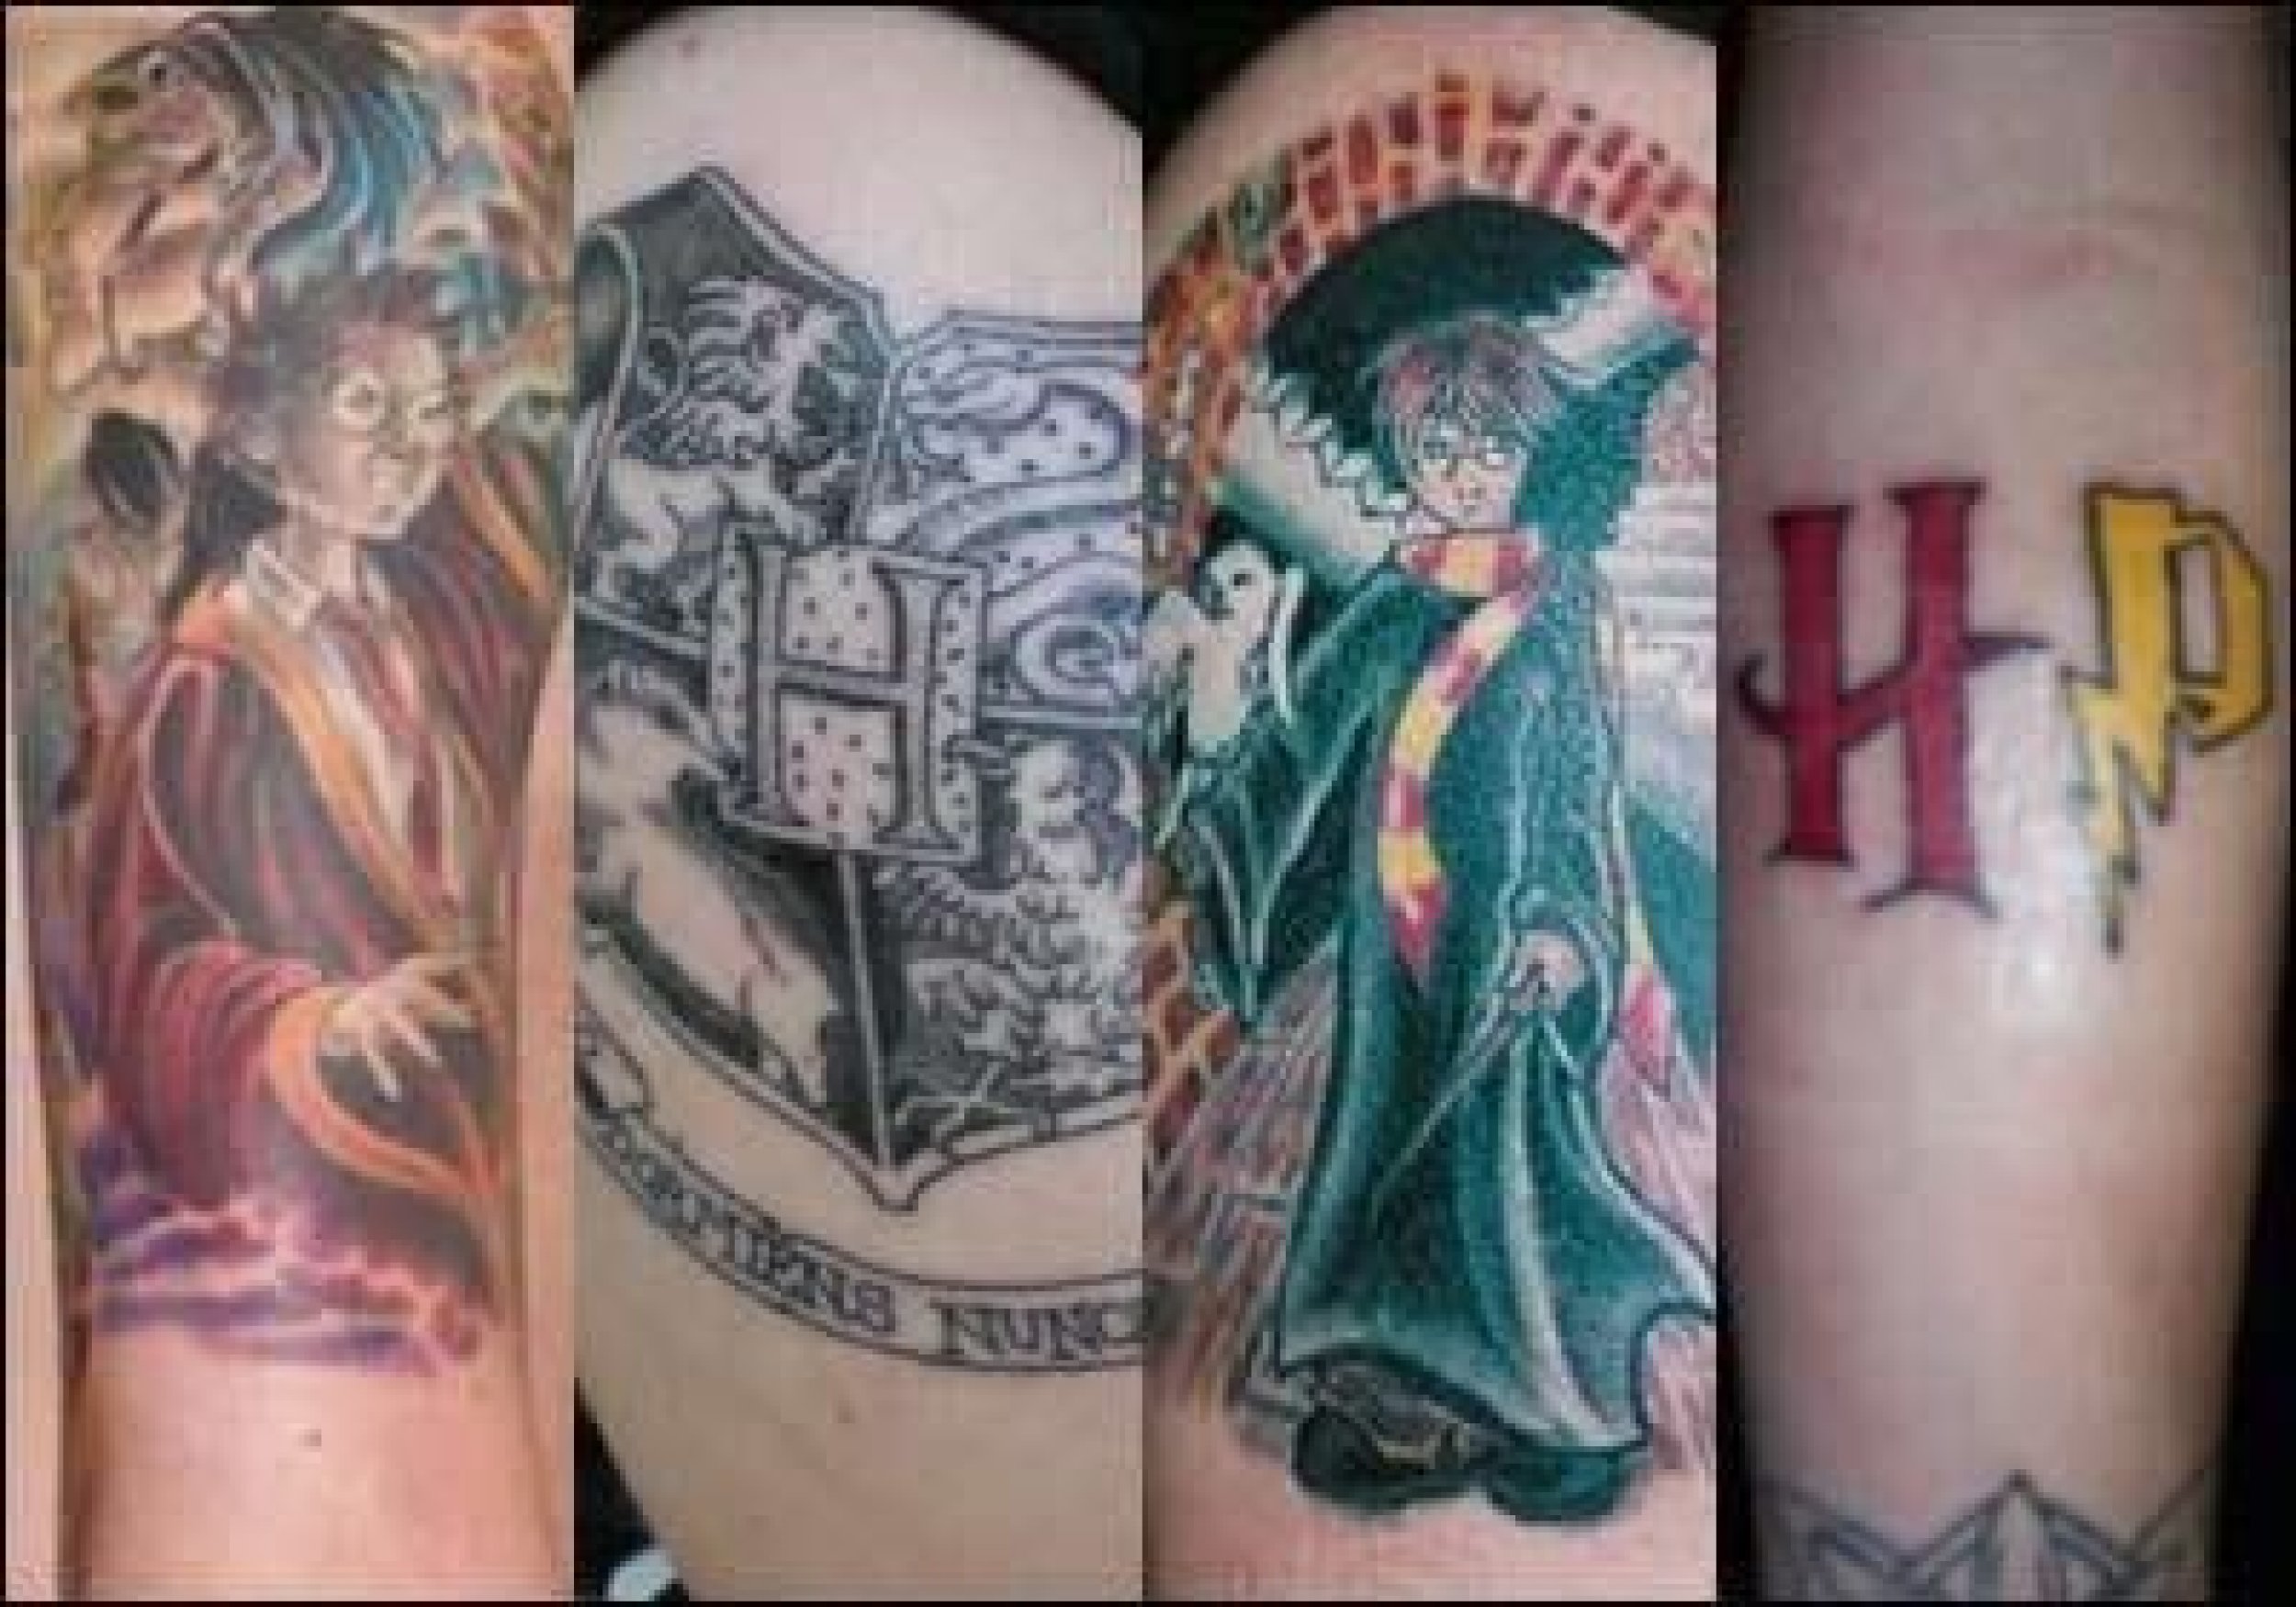 And Now, A Whole Gallery of Harry Potter Tattoos